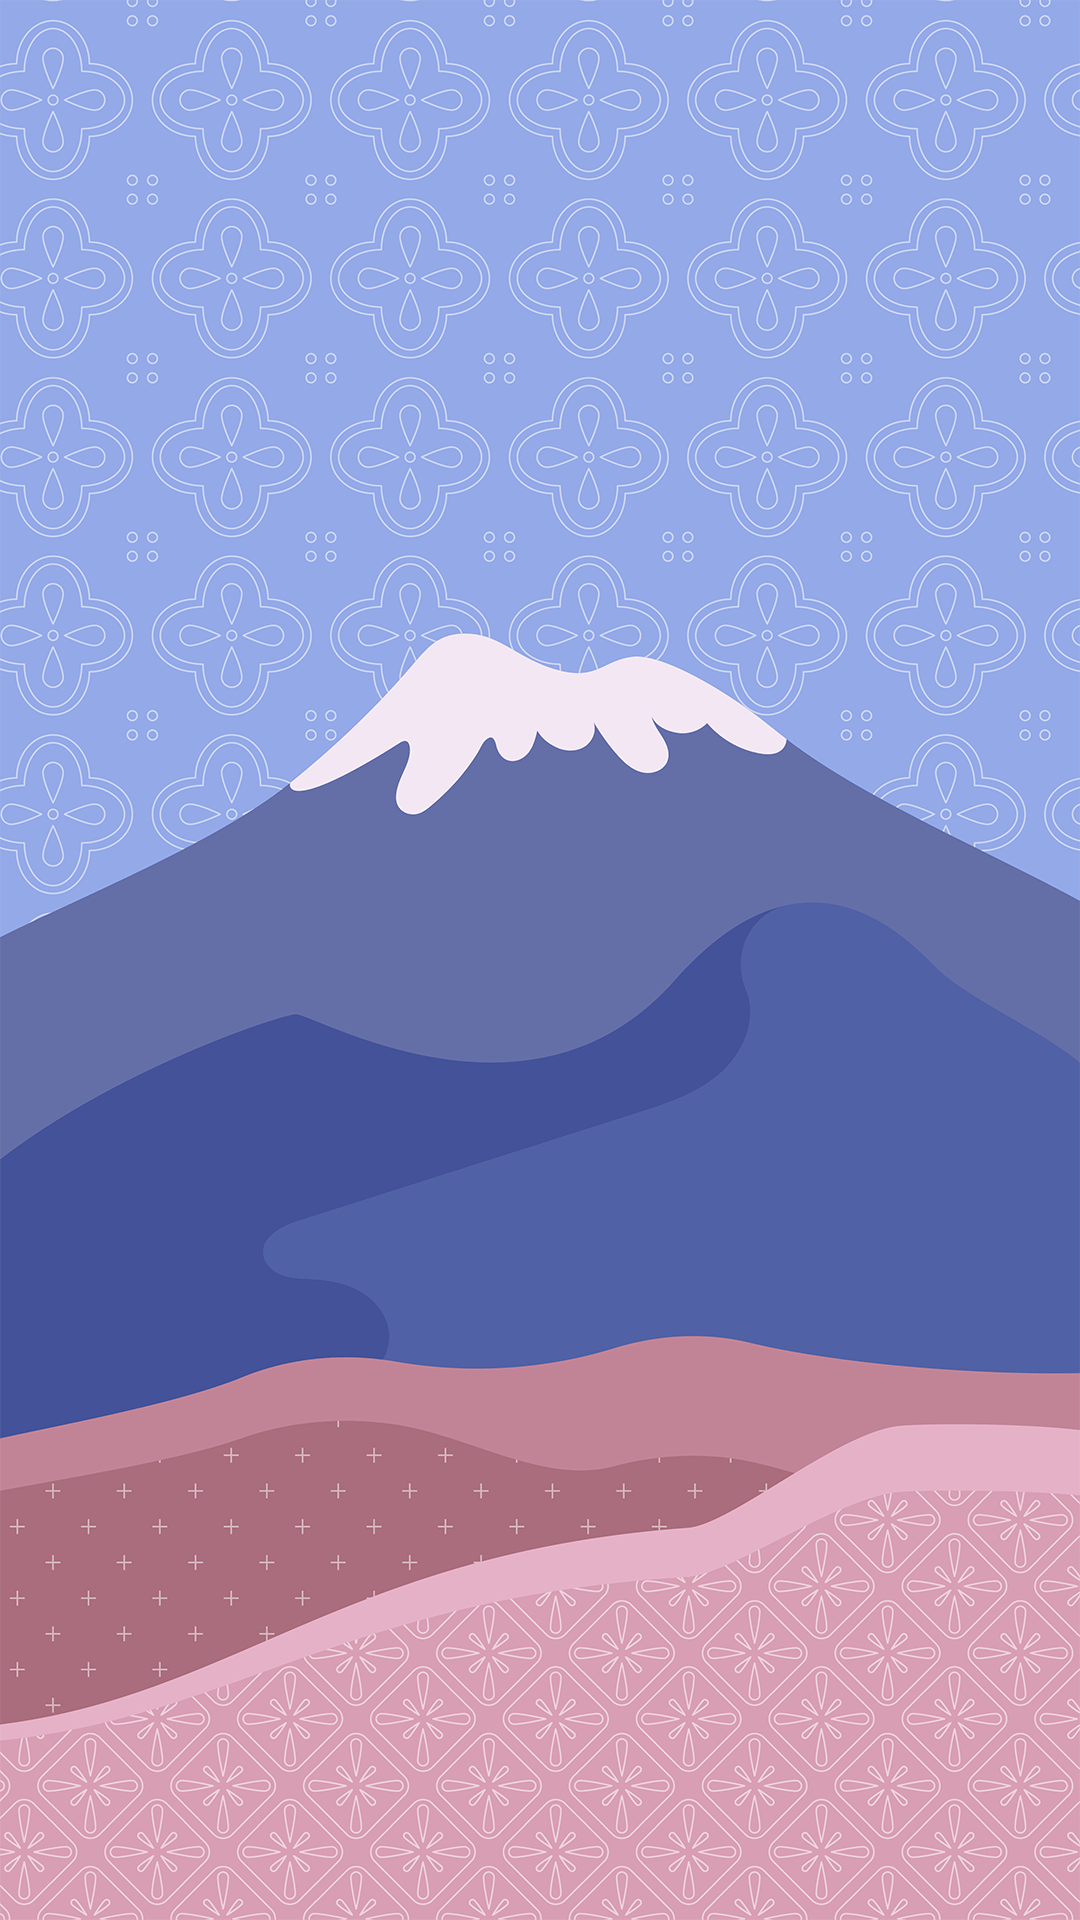 Illustration of a blue mountain with a white peak against a patterned background - Minimalist, phone